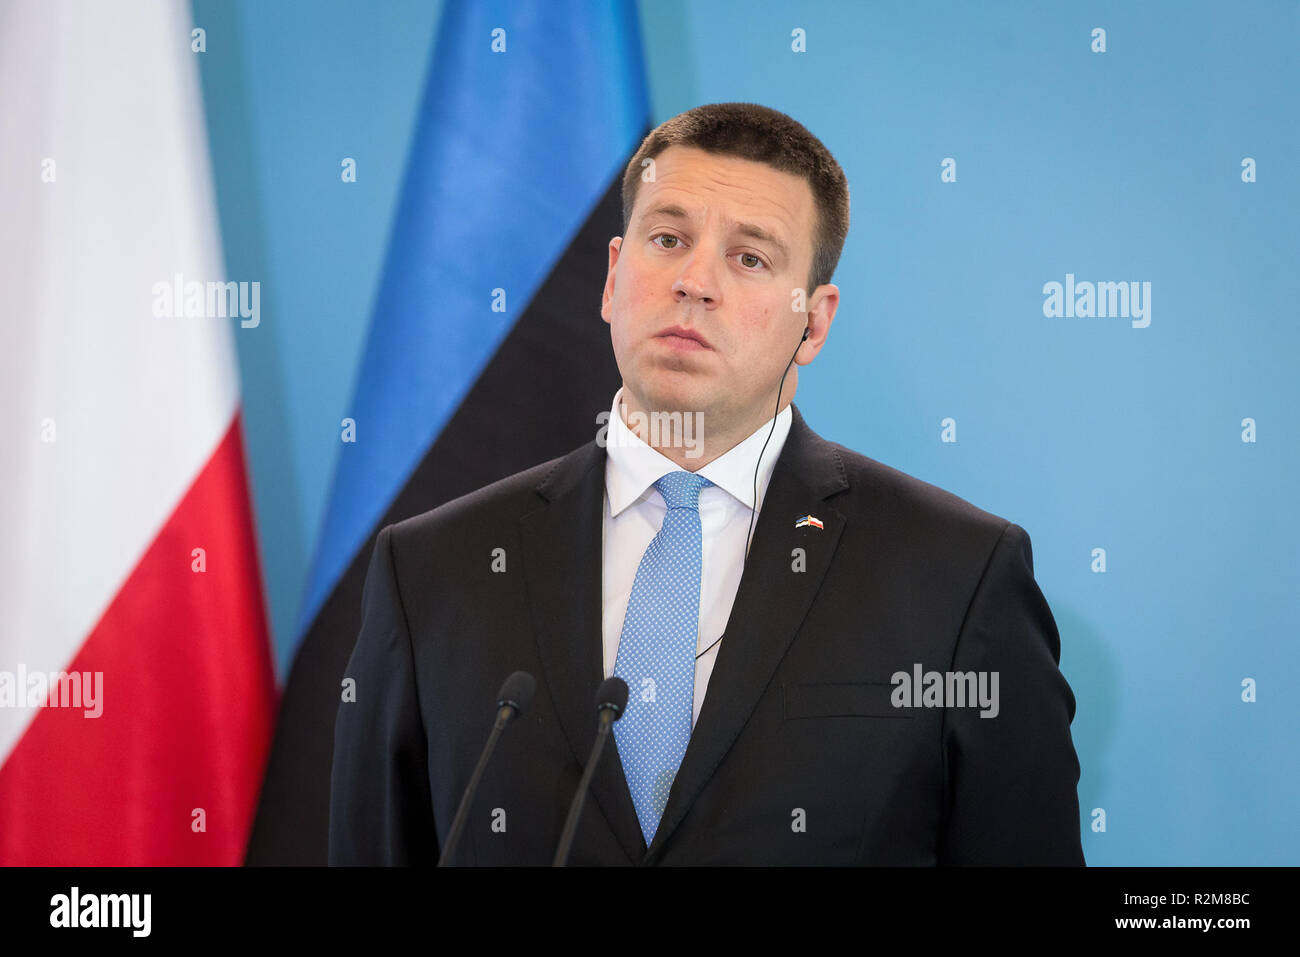 Prime Minister of Estonia Juri Ratas during the press conference after meeting with Prime Minister of Poland Beata Szydlo at Chancellery of the Prime Minister in Warsaw, Poland on 19 September 2017 Stock Photo